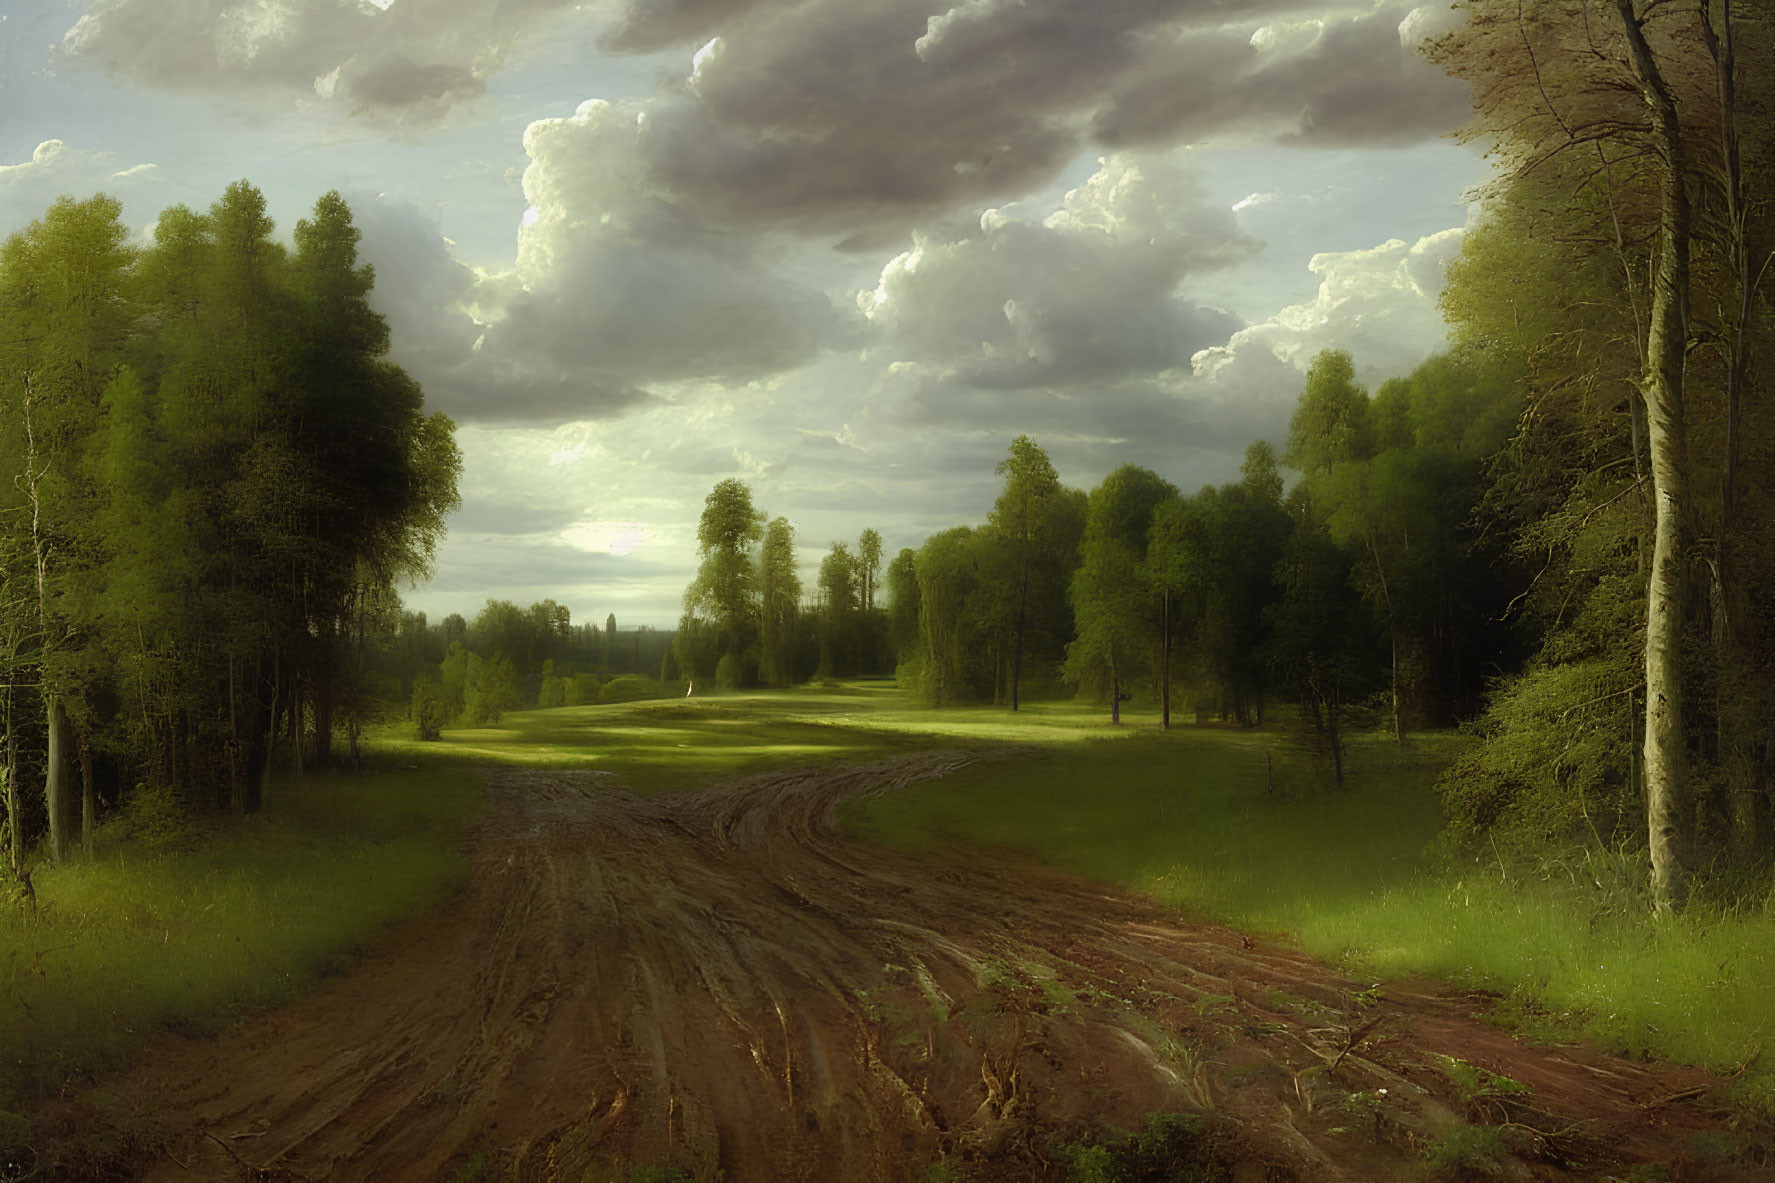 Tranquil landscape: winding dirt road in lush forest under dramatic sky